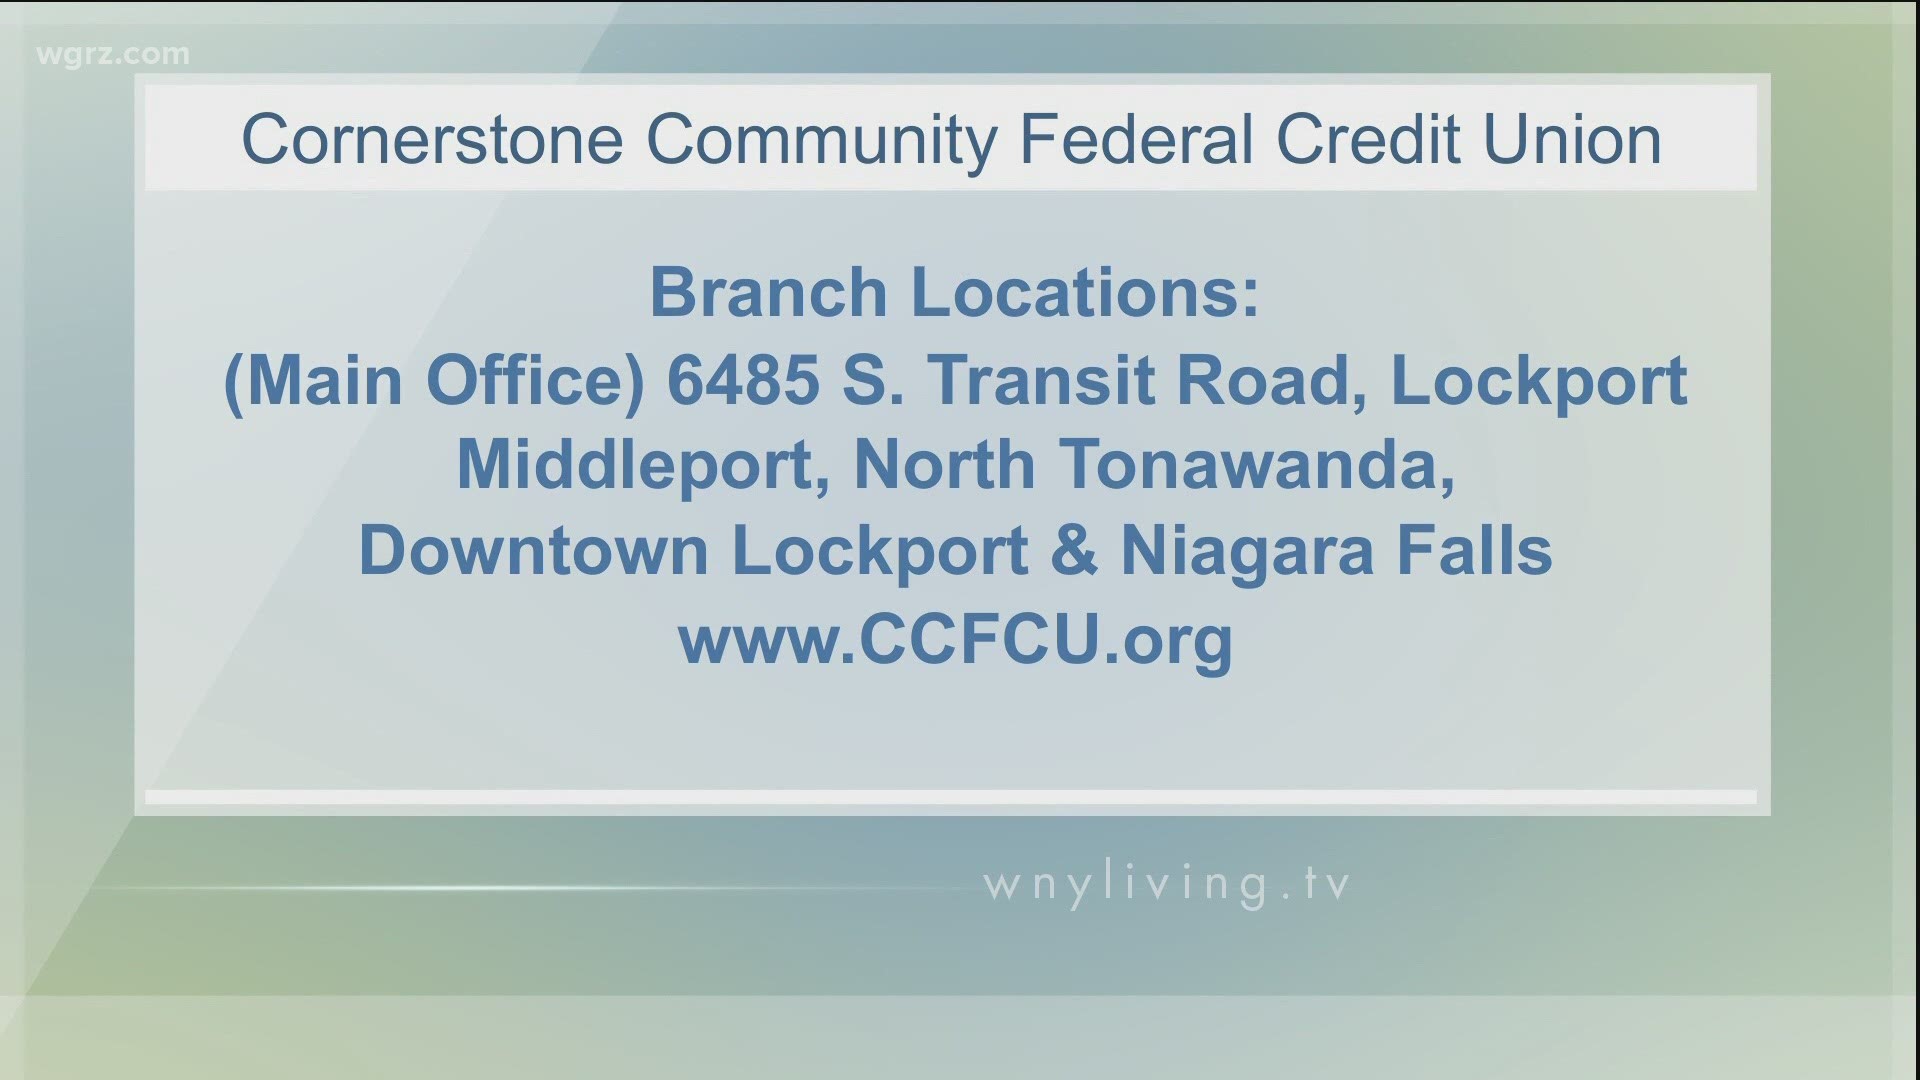 WNY Living - December 26 - Cornerstone Community Federal Credit Union (THIS VIDEO IS SPONSORED BY CORNERSTONE COMMUNITY FEDERAL CREDIT UNION)